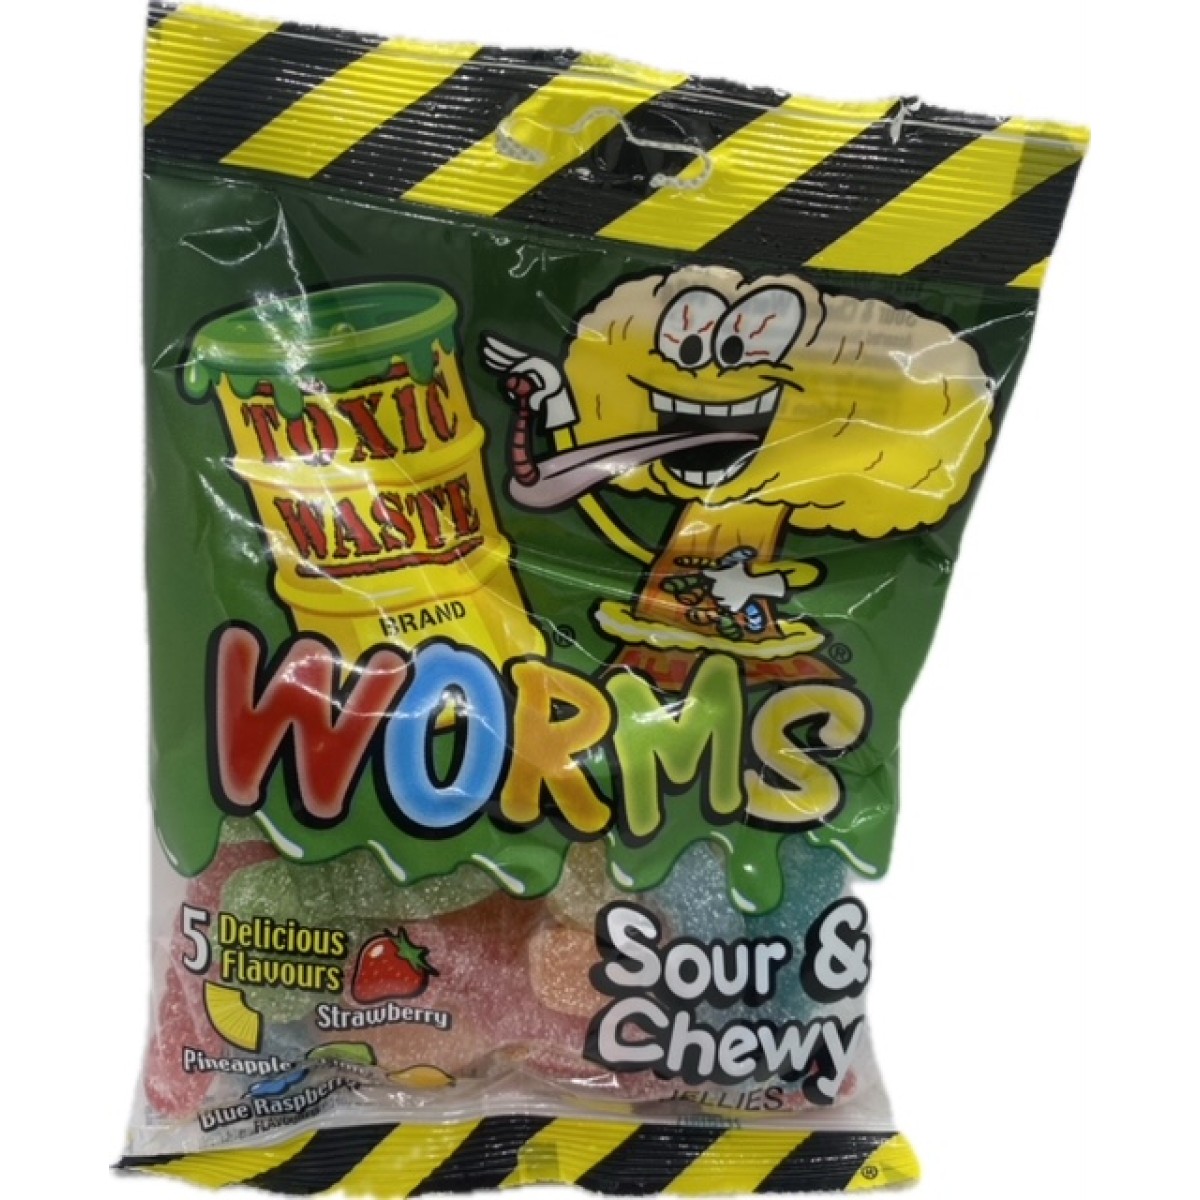 Toxic waste sour worms 